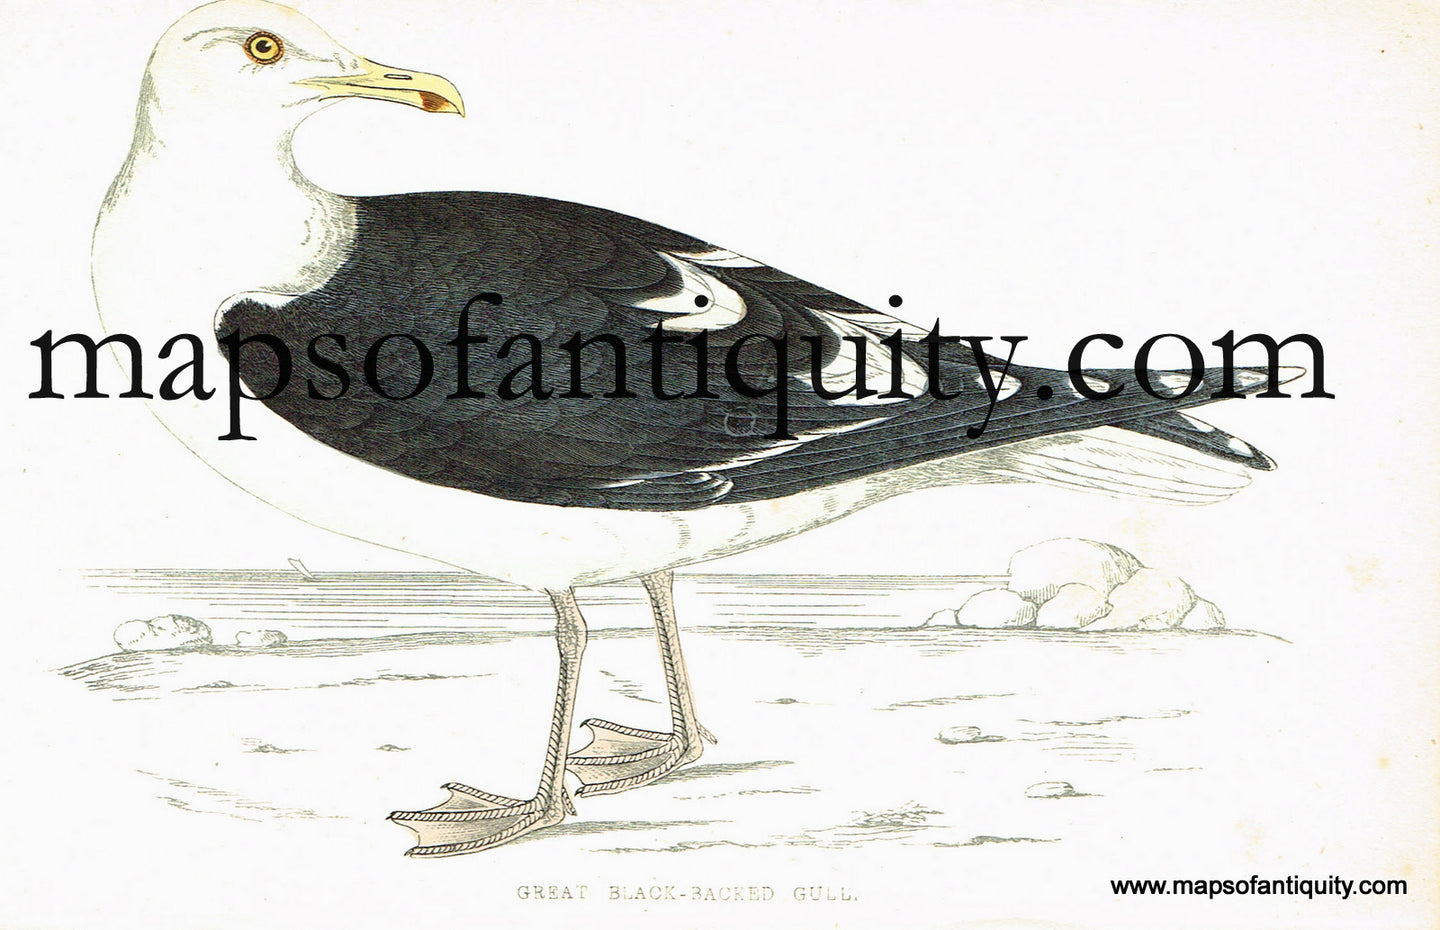 Antique-Hand-Colored-Engraved-Illustration-Great-Black-backed-Gull-Antique-Prints-Natural-History-Birds-1867-Morris-Maps-Of-Antiquity